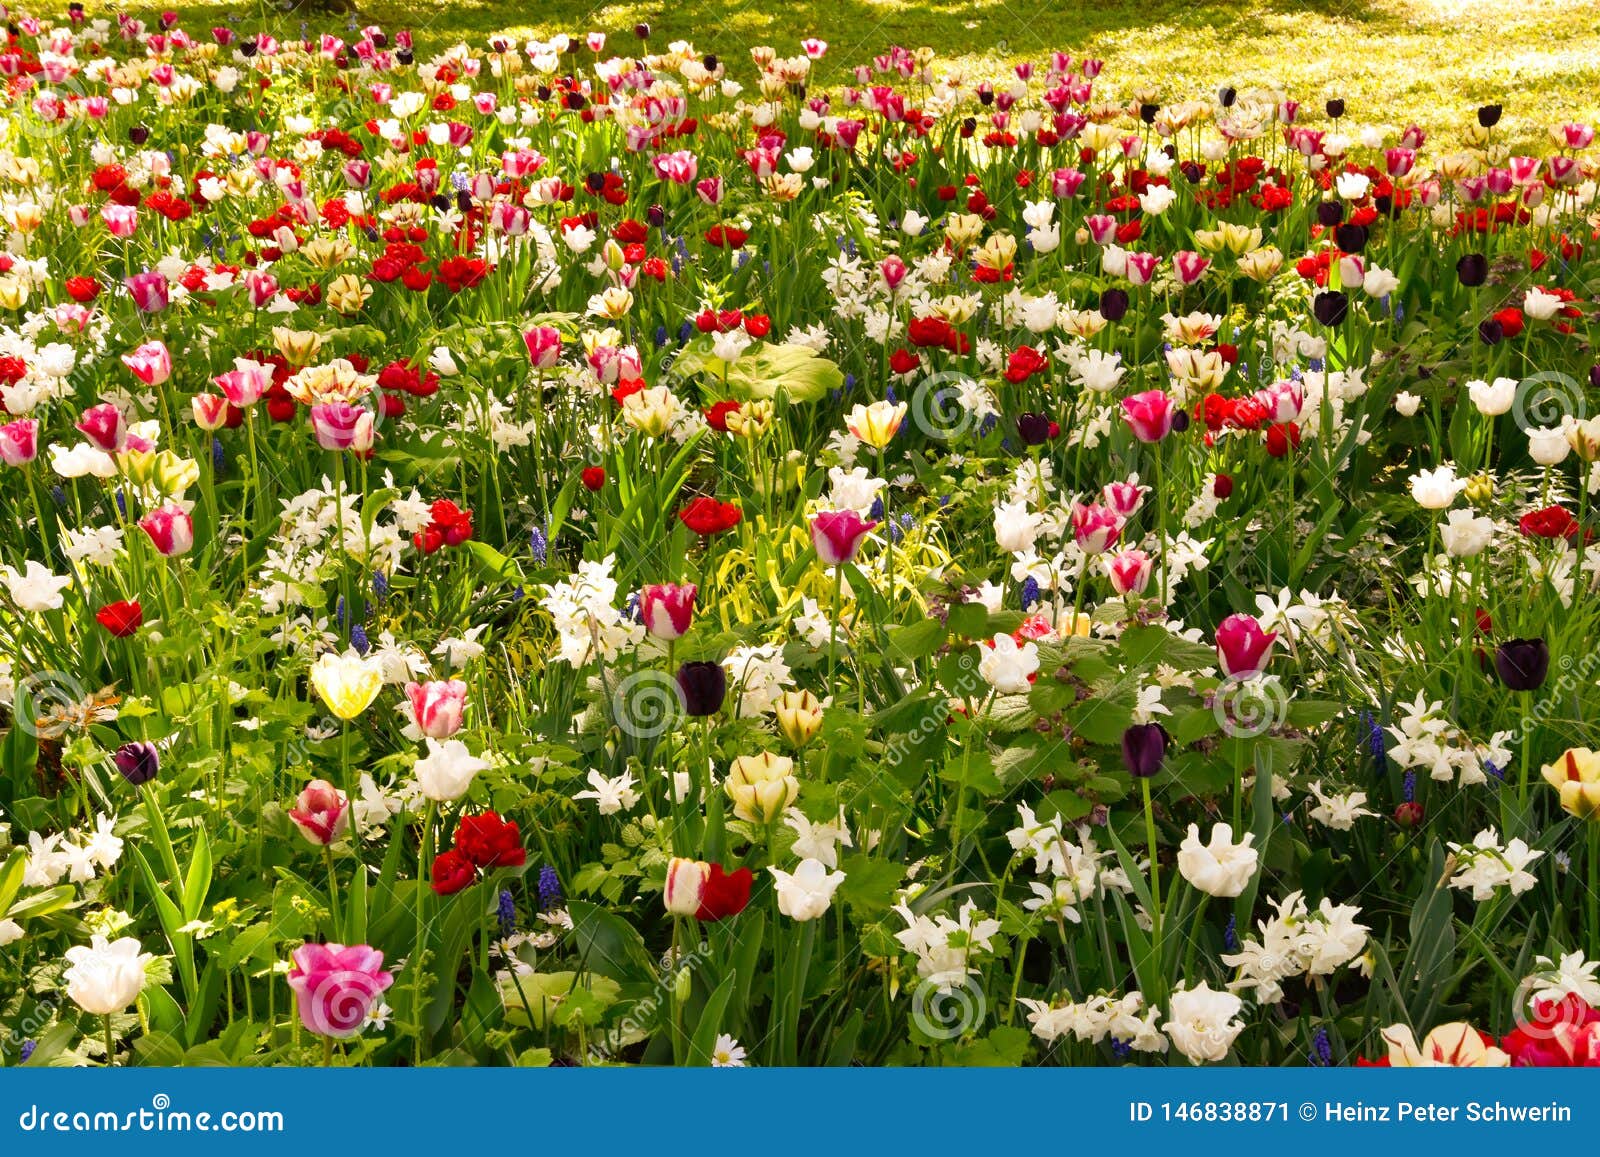 Flower Meadow with Tulips, Daffodils and Daffodils Stock Image - Image ...